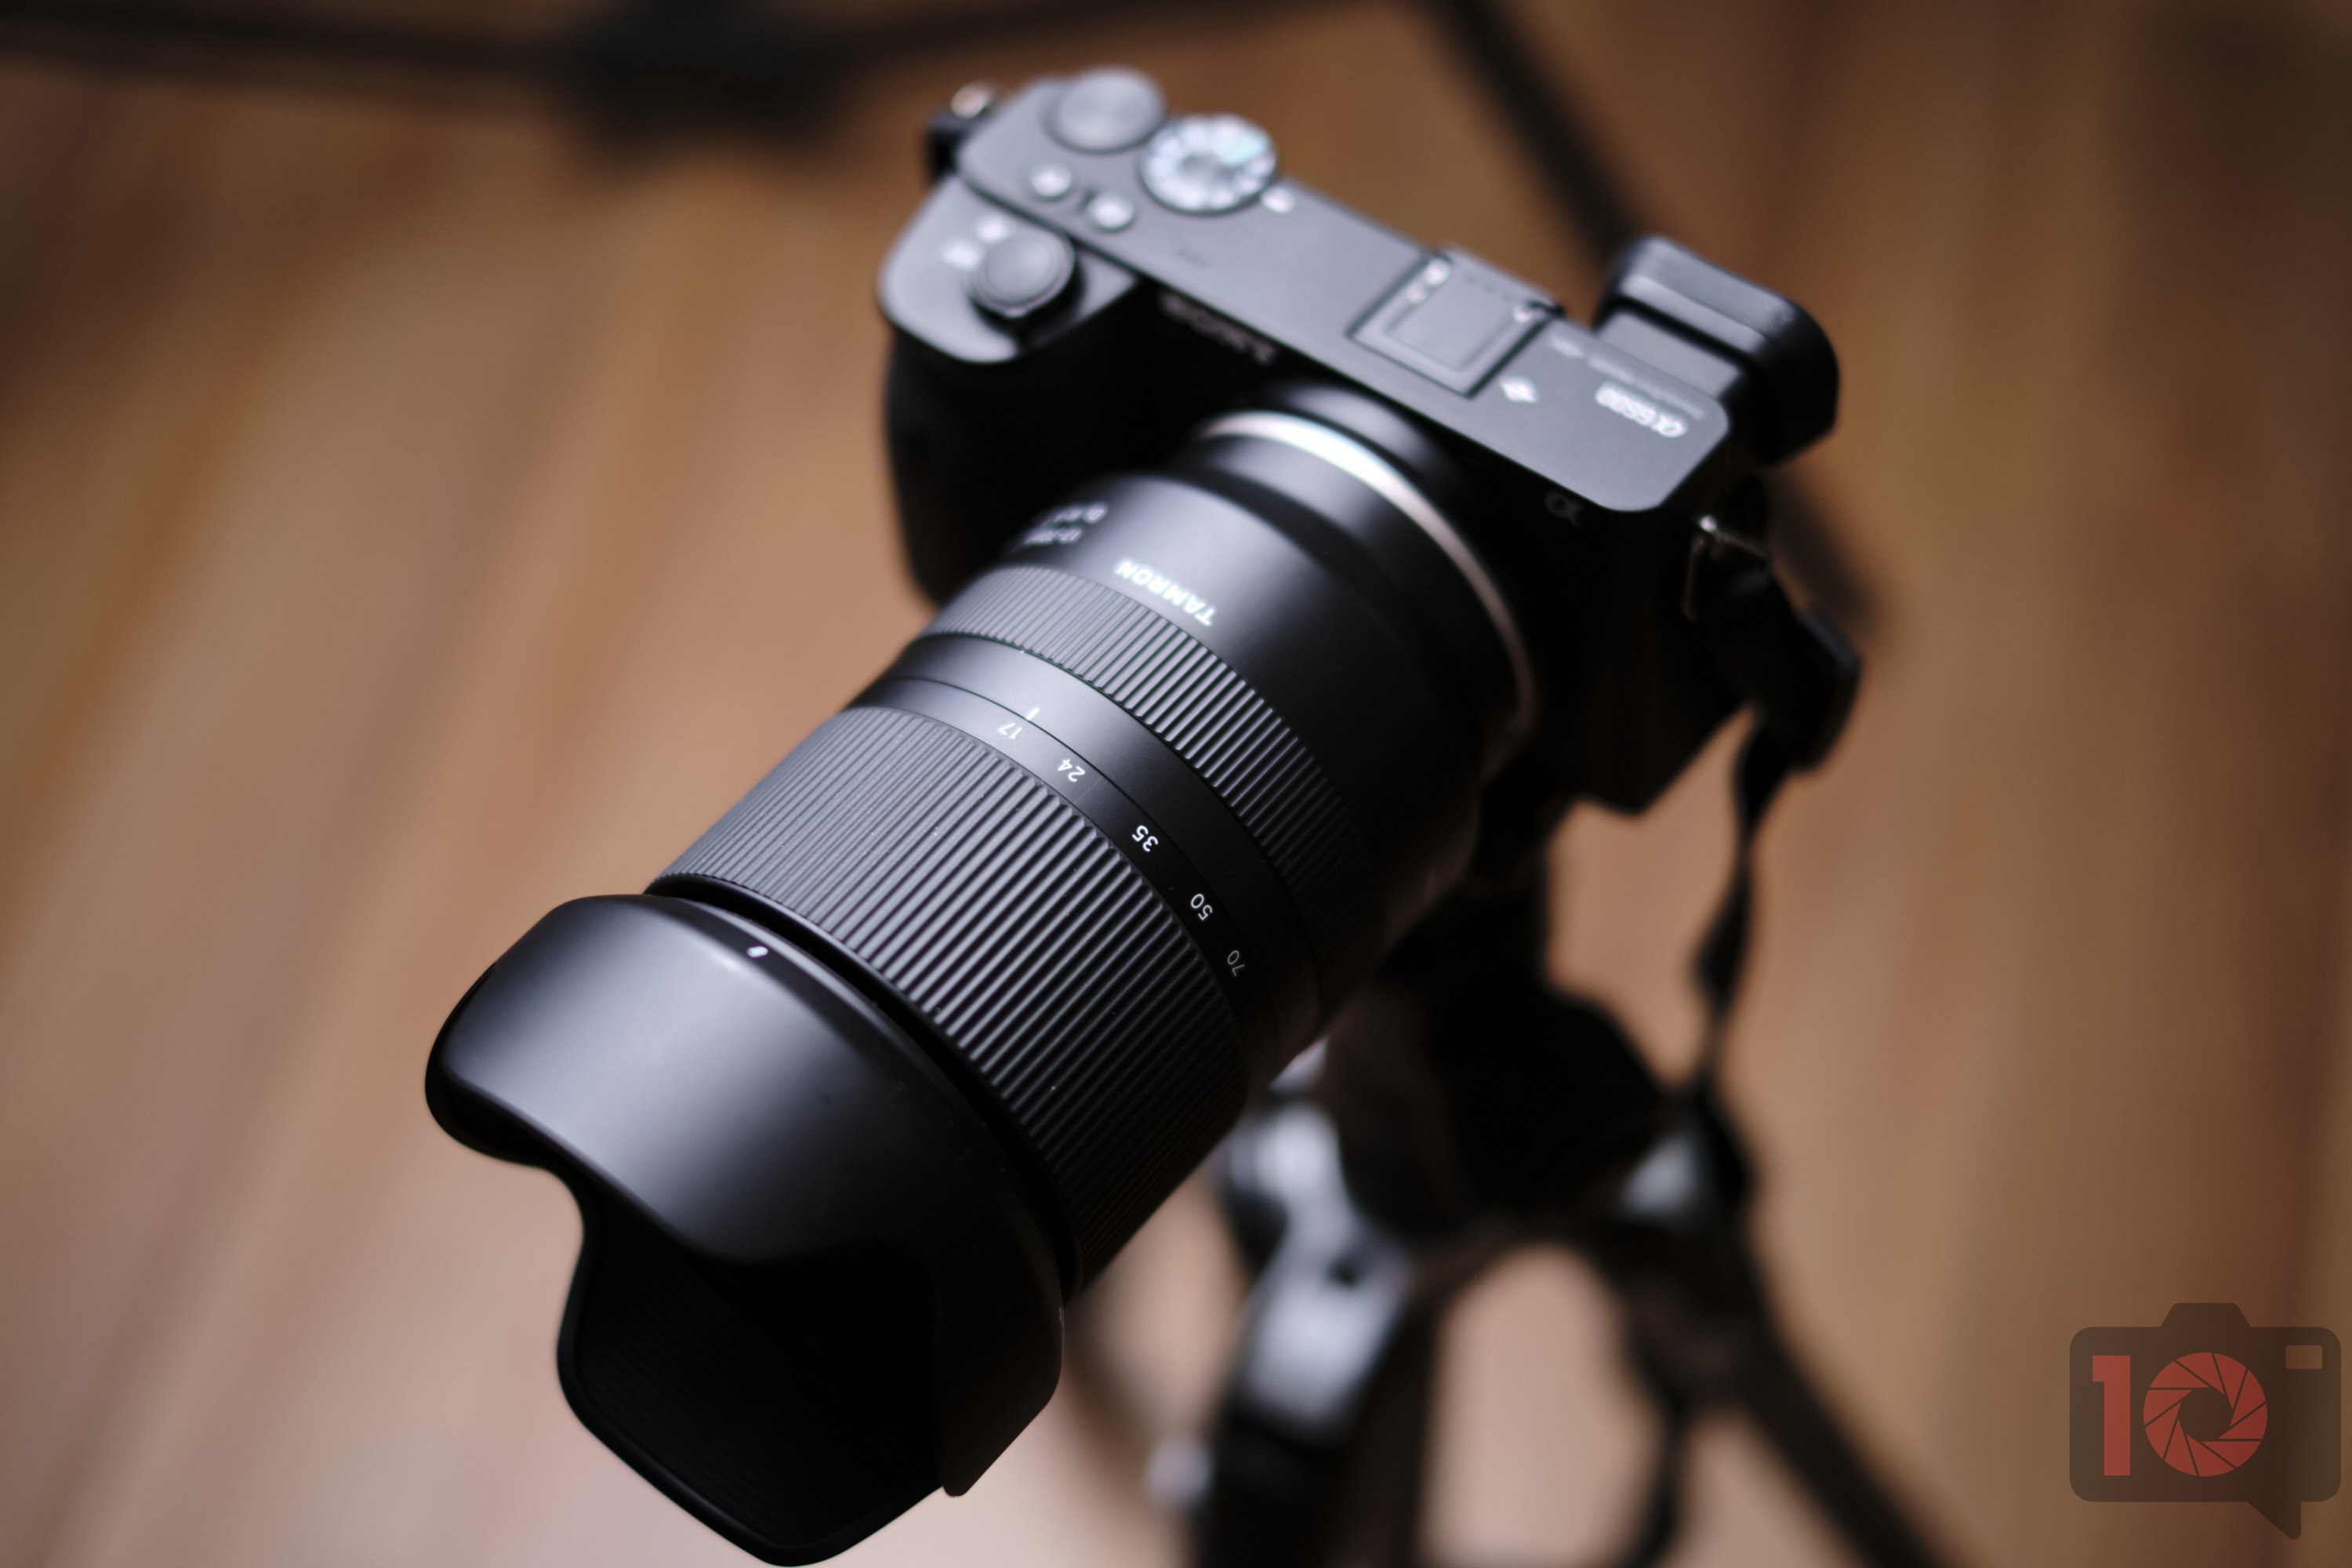 Chris Gampat The Phoblographer Tamron 17-70mm f2.8 Di III-A VC RXD Review product images 1.41-250s400 7